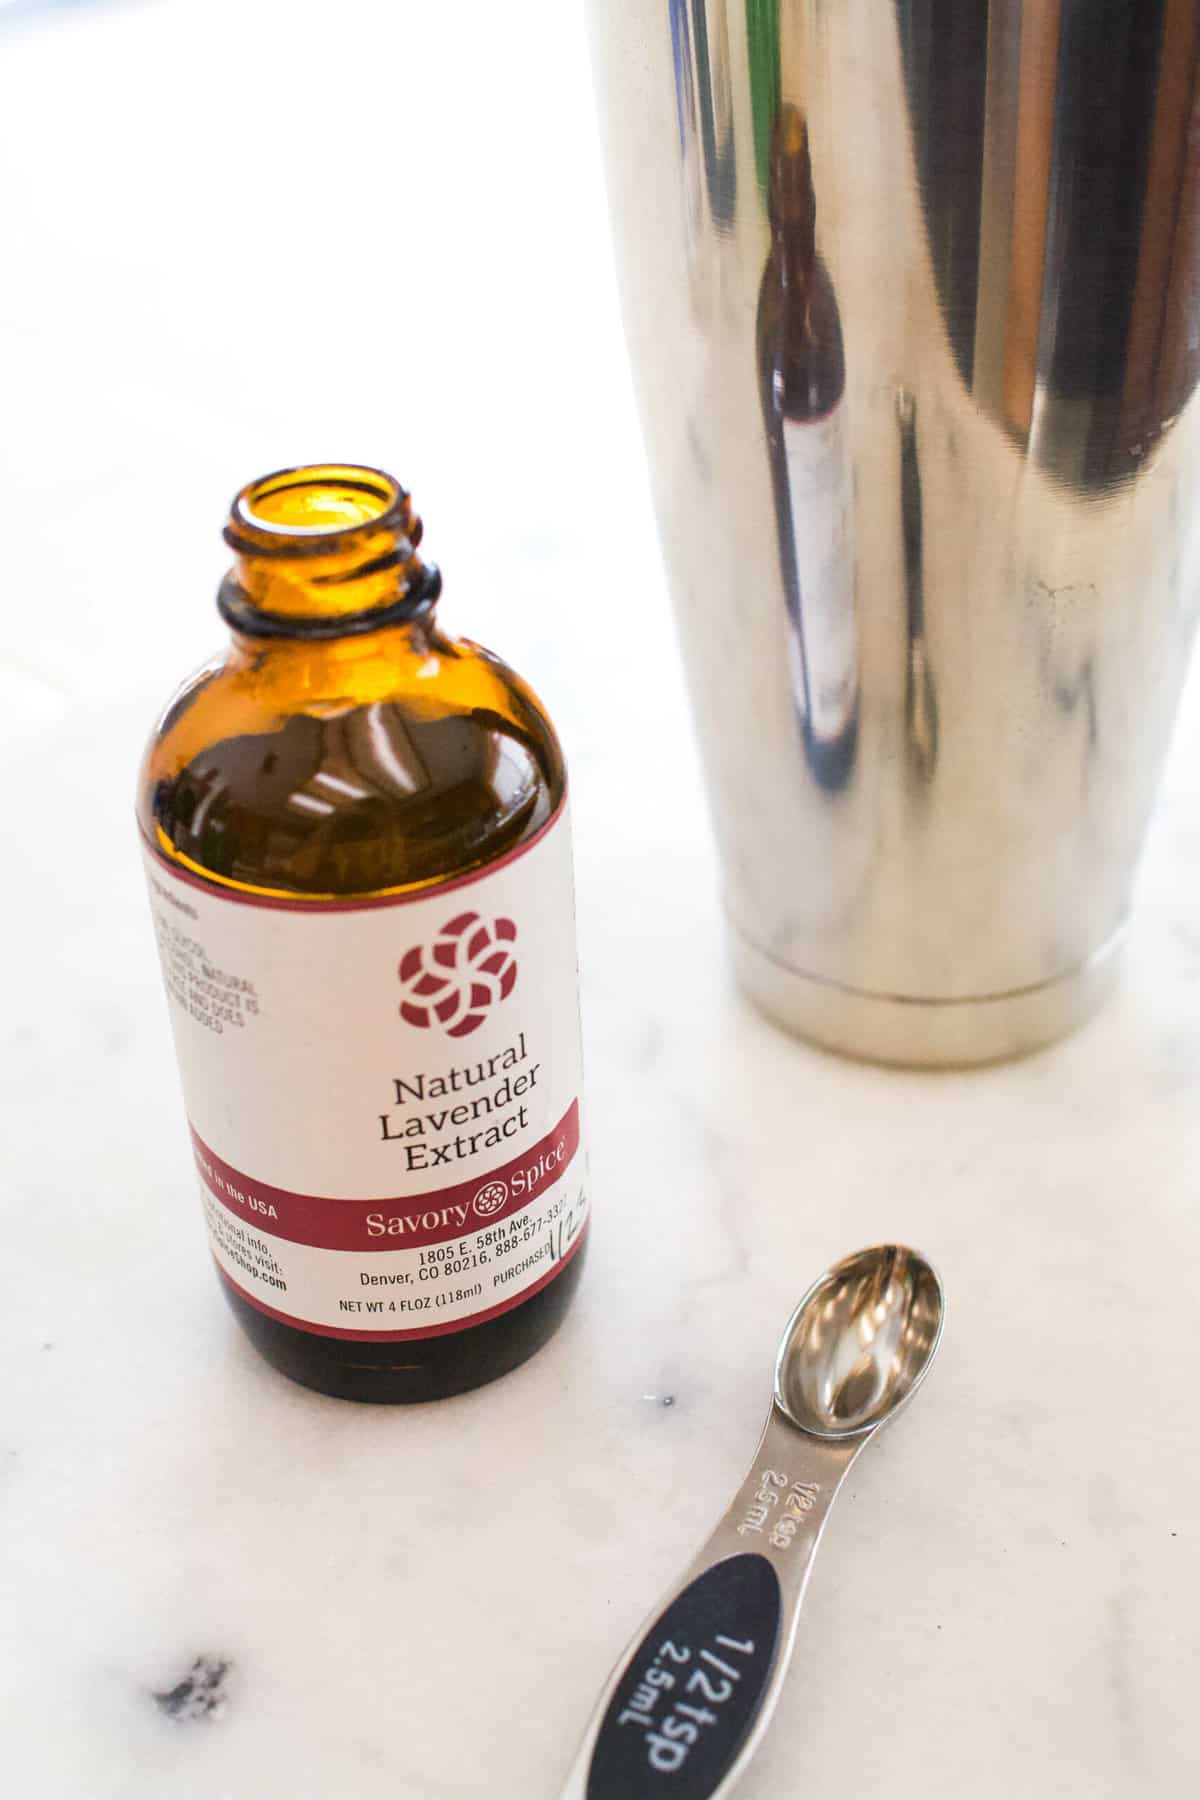 Bottle of lavender extract and a measuring spoon next to a cocktail shaker.